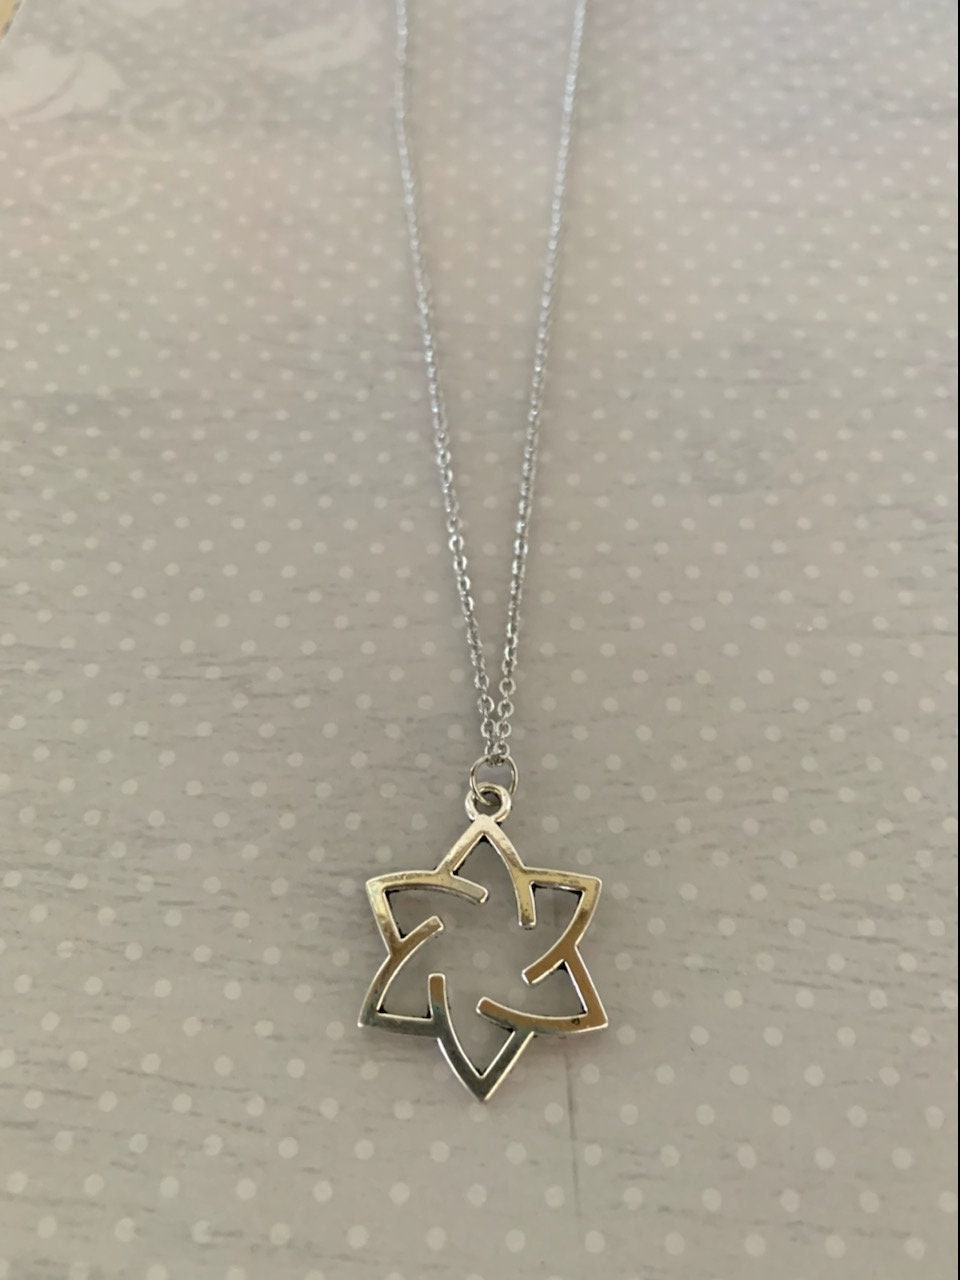 Star Of David Necklace Tiffany - 4 For Sale on 1stDibs | tiffany magen david,  gold tiffany & co star of david necklace, men's star of david necklace  tiffany